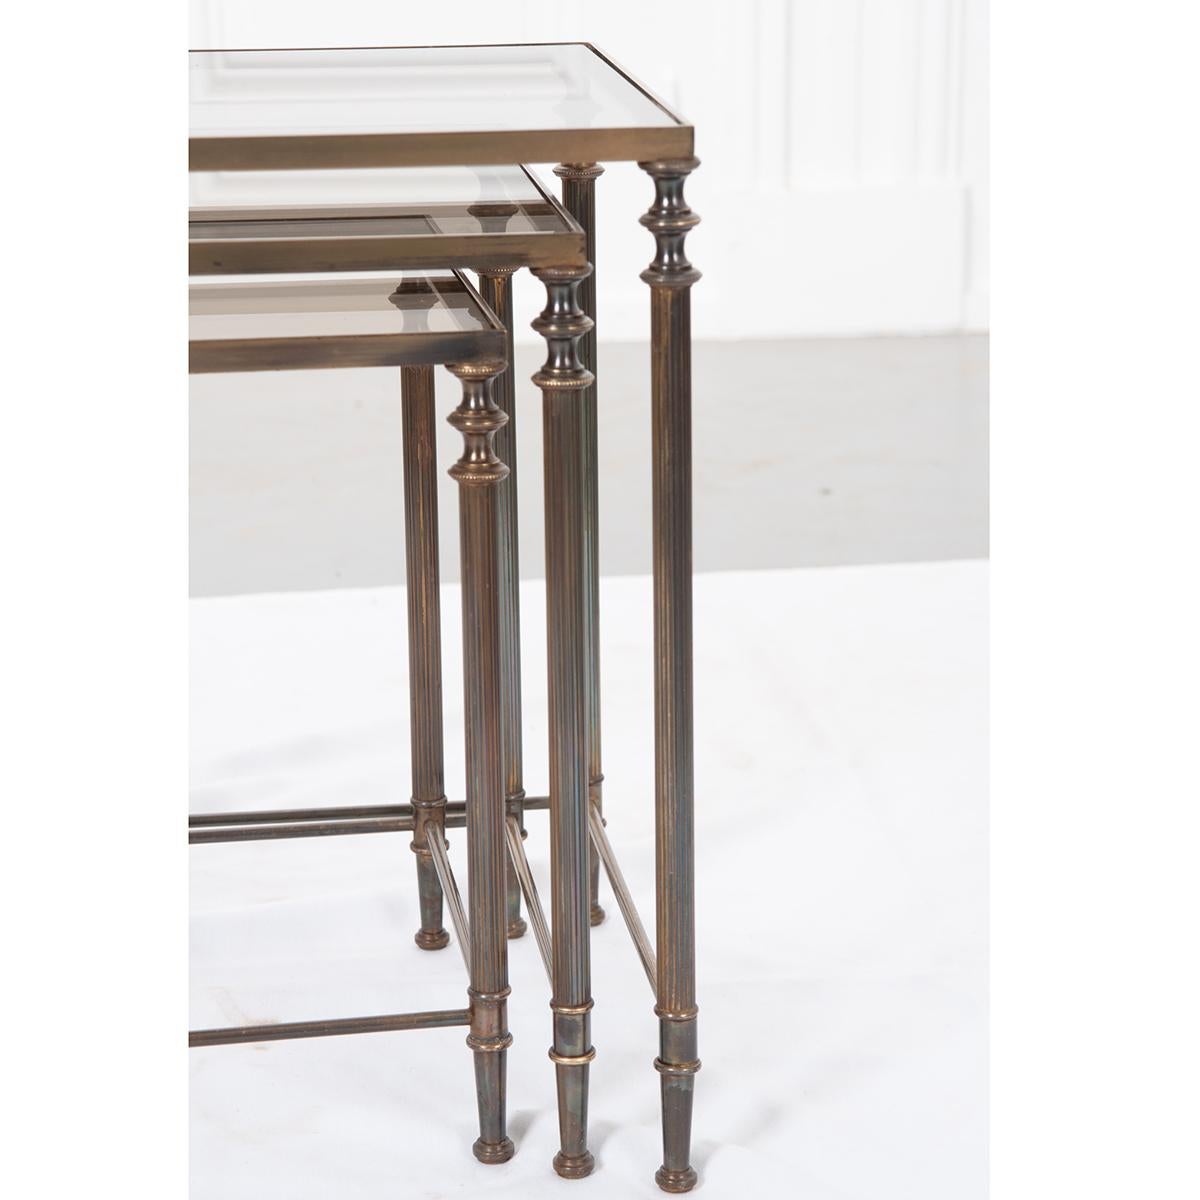 Set of three French, brass nesting tables with inset tinted glass tops. The four legs have turned-like caps with fluted columns and turned-like feet. Simple brass rod stretchers connect the legs for an added detail. 

Dimensions:
1. 17-¼”H x 20-⅞”W